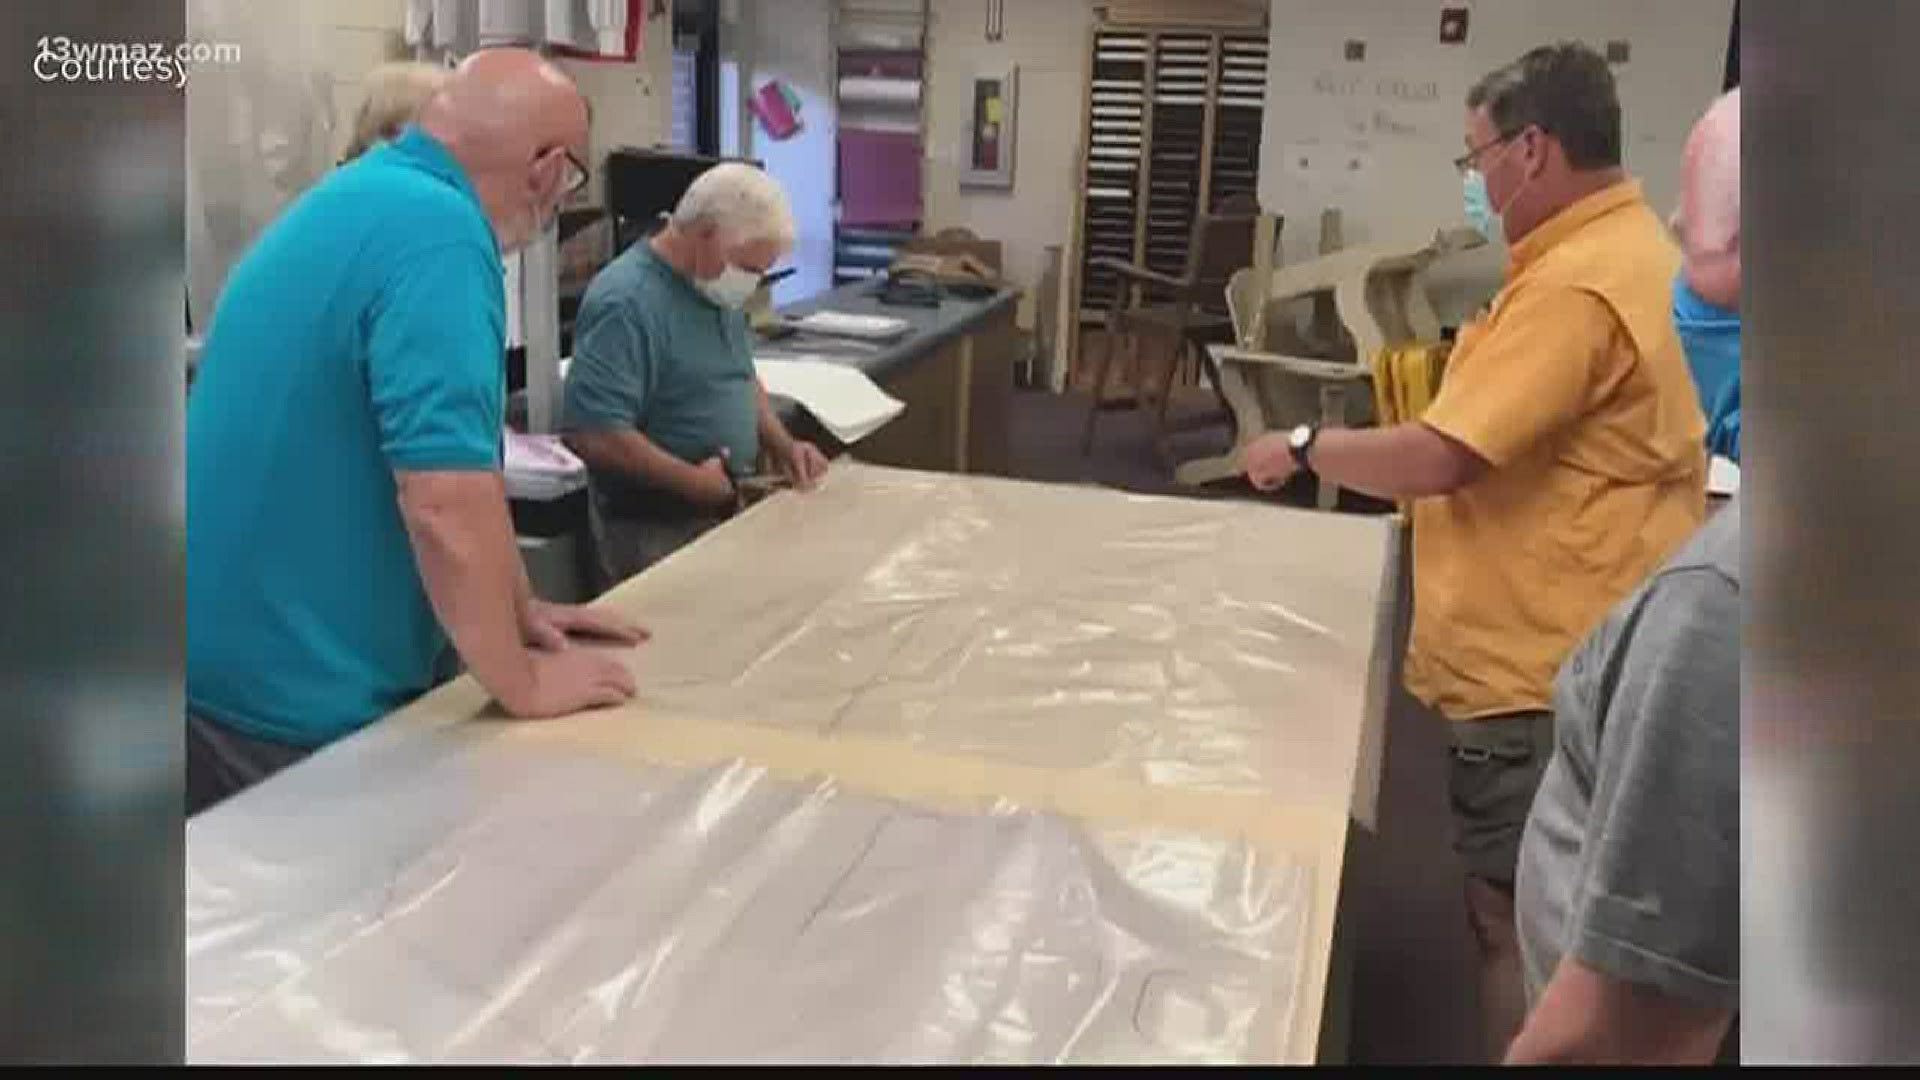 The Firestarter FABLab in Houston County has been able to make PPE for businesses to protect against COVID-19, and now they're allowing volunteers to help them out.